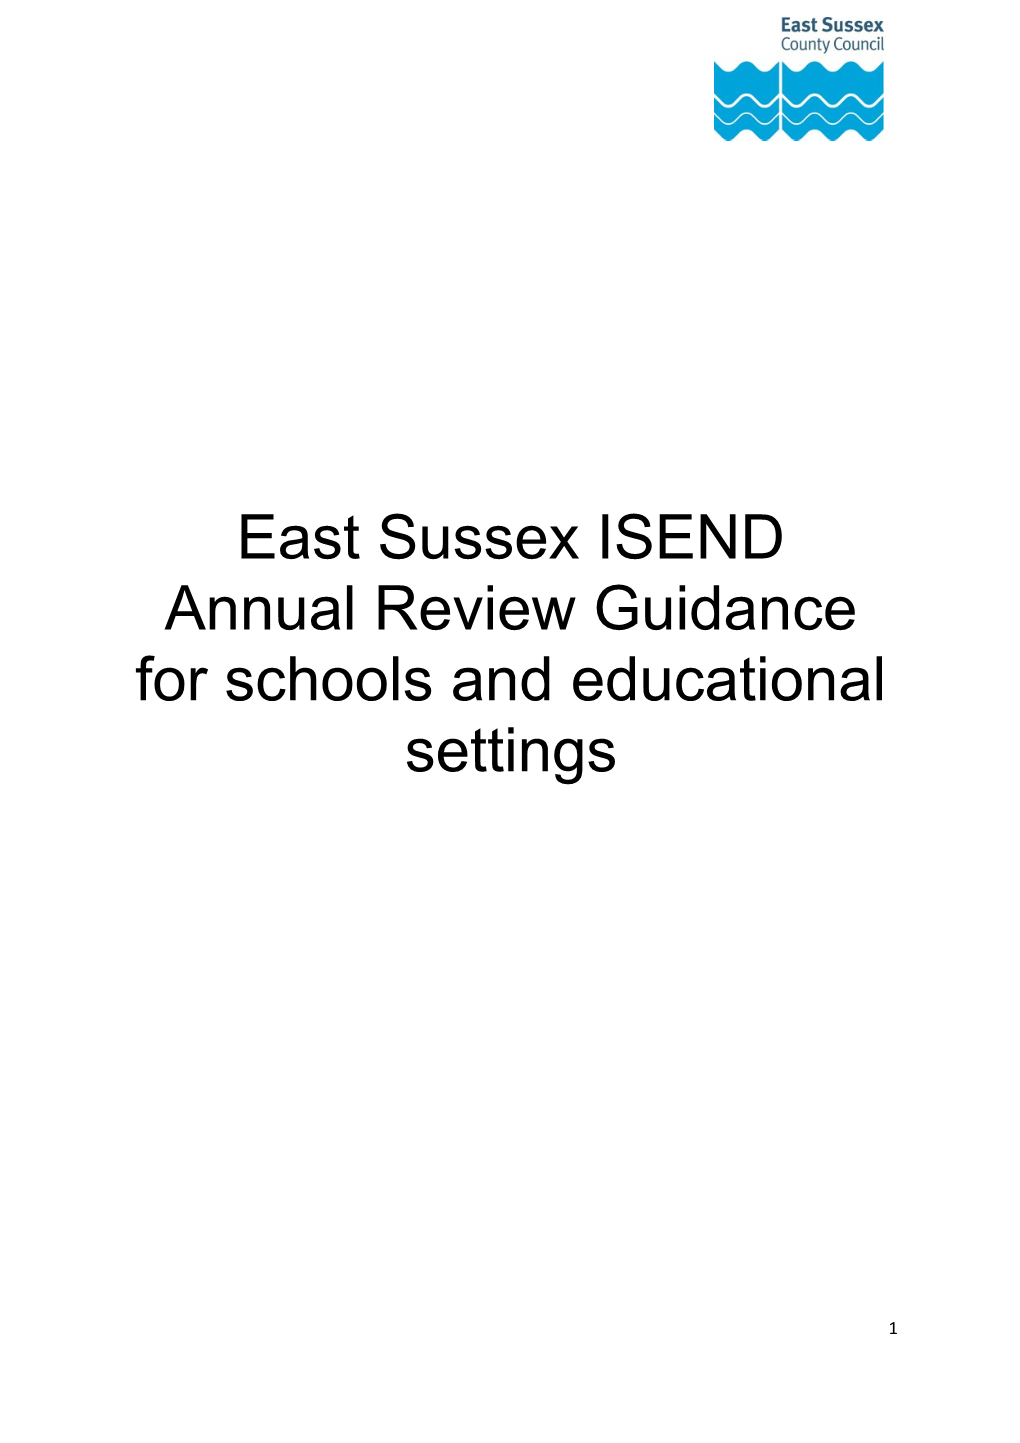 Annual Review Guidance for Schools and Educational Settings